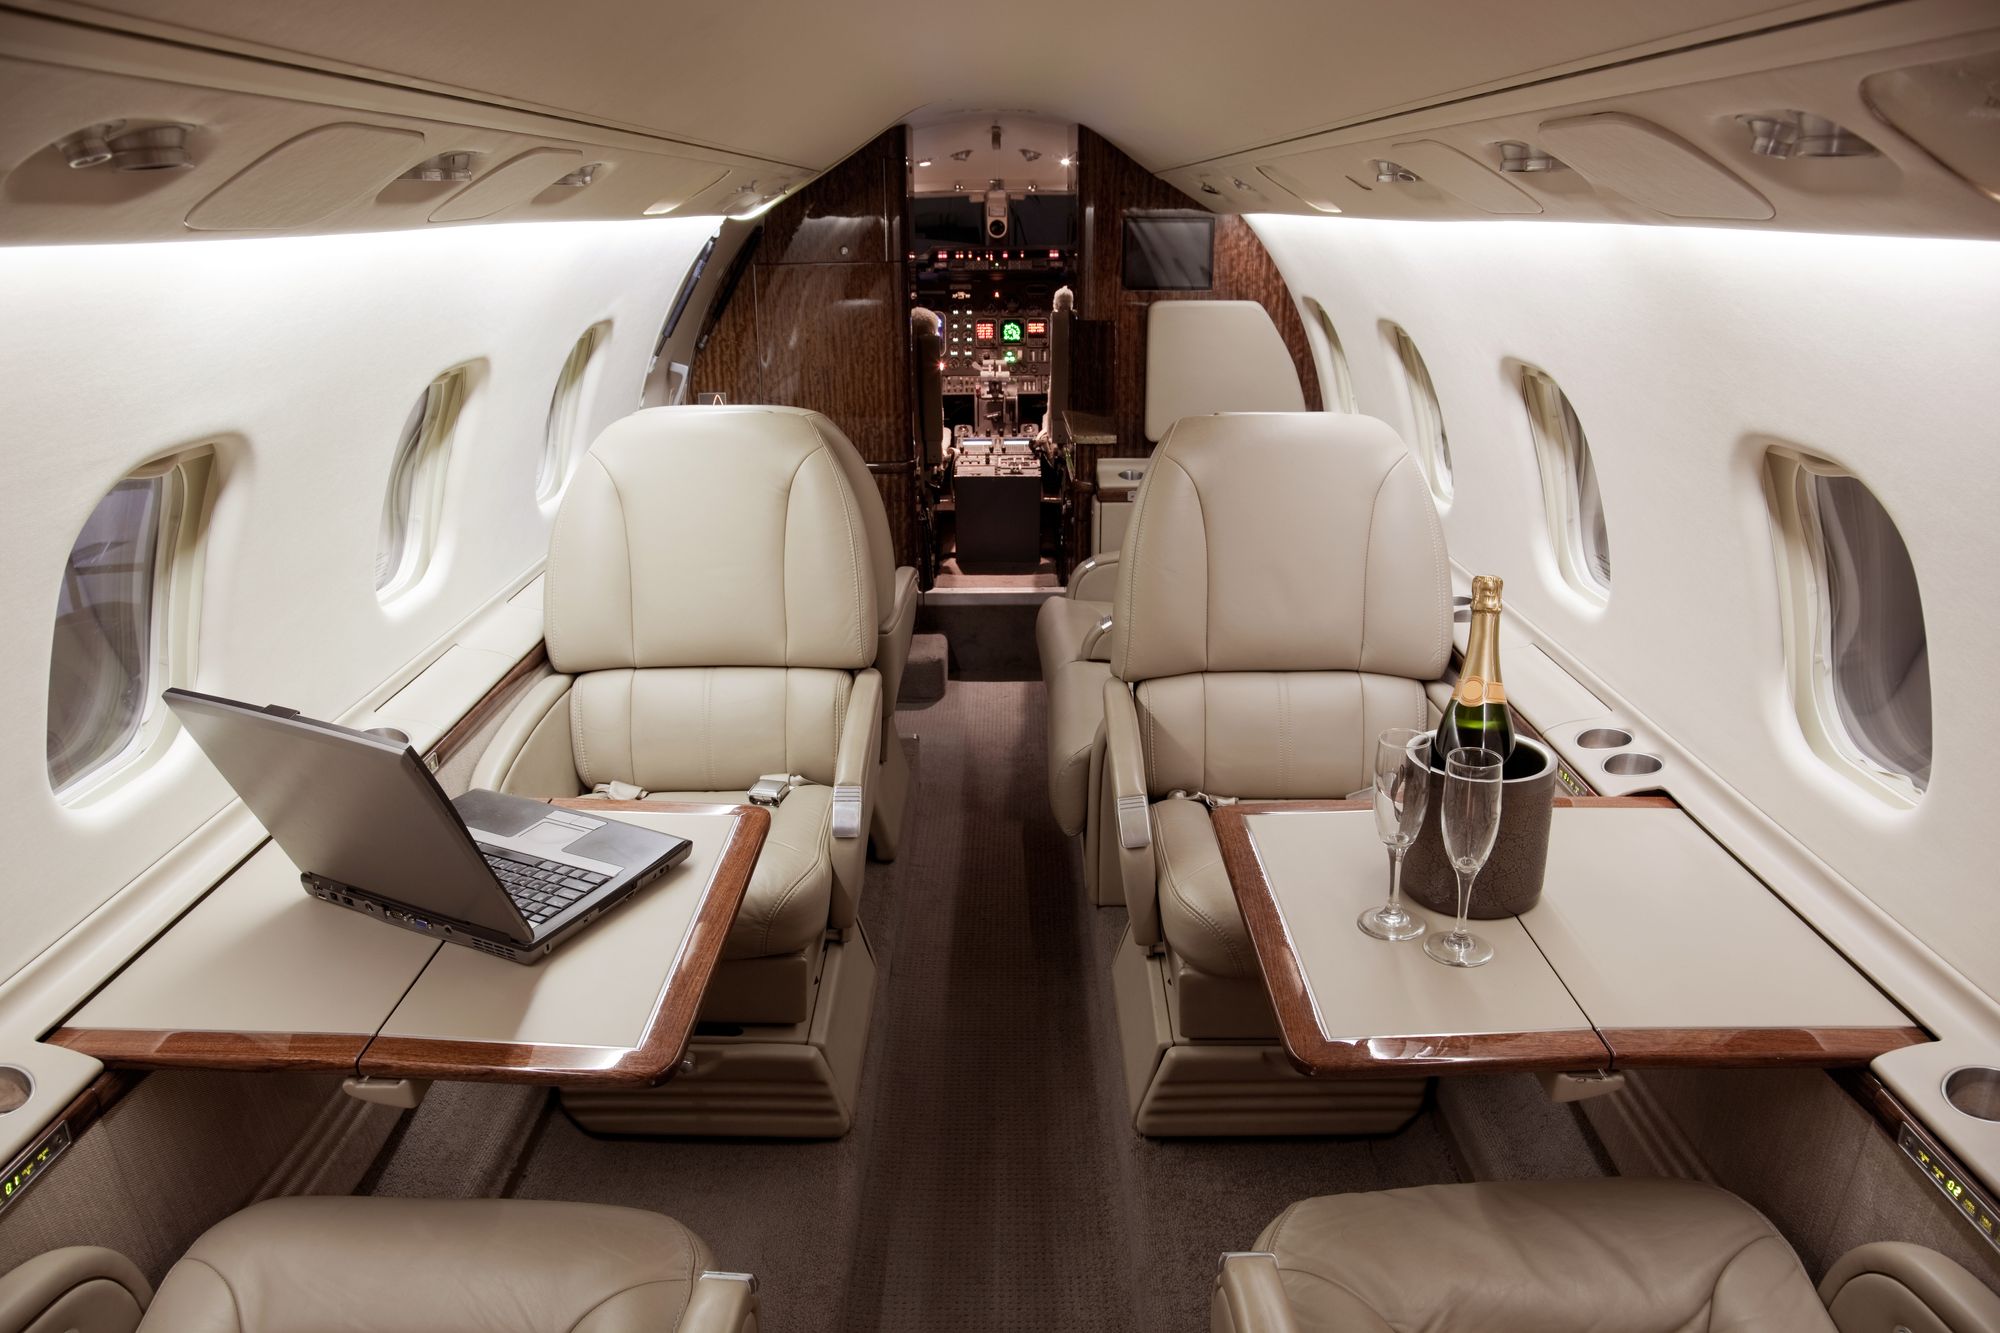 10 REASONS TO FLY PRIVATE